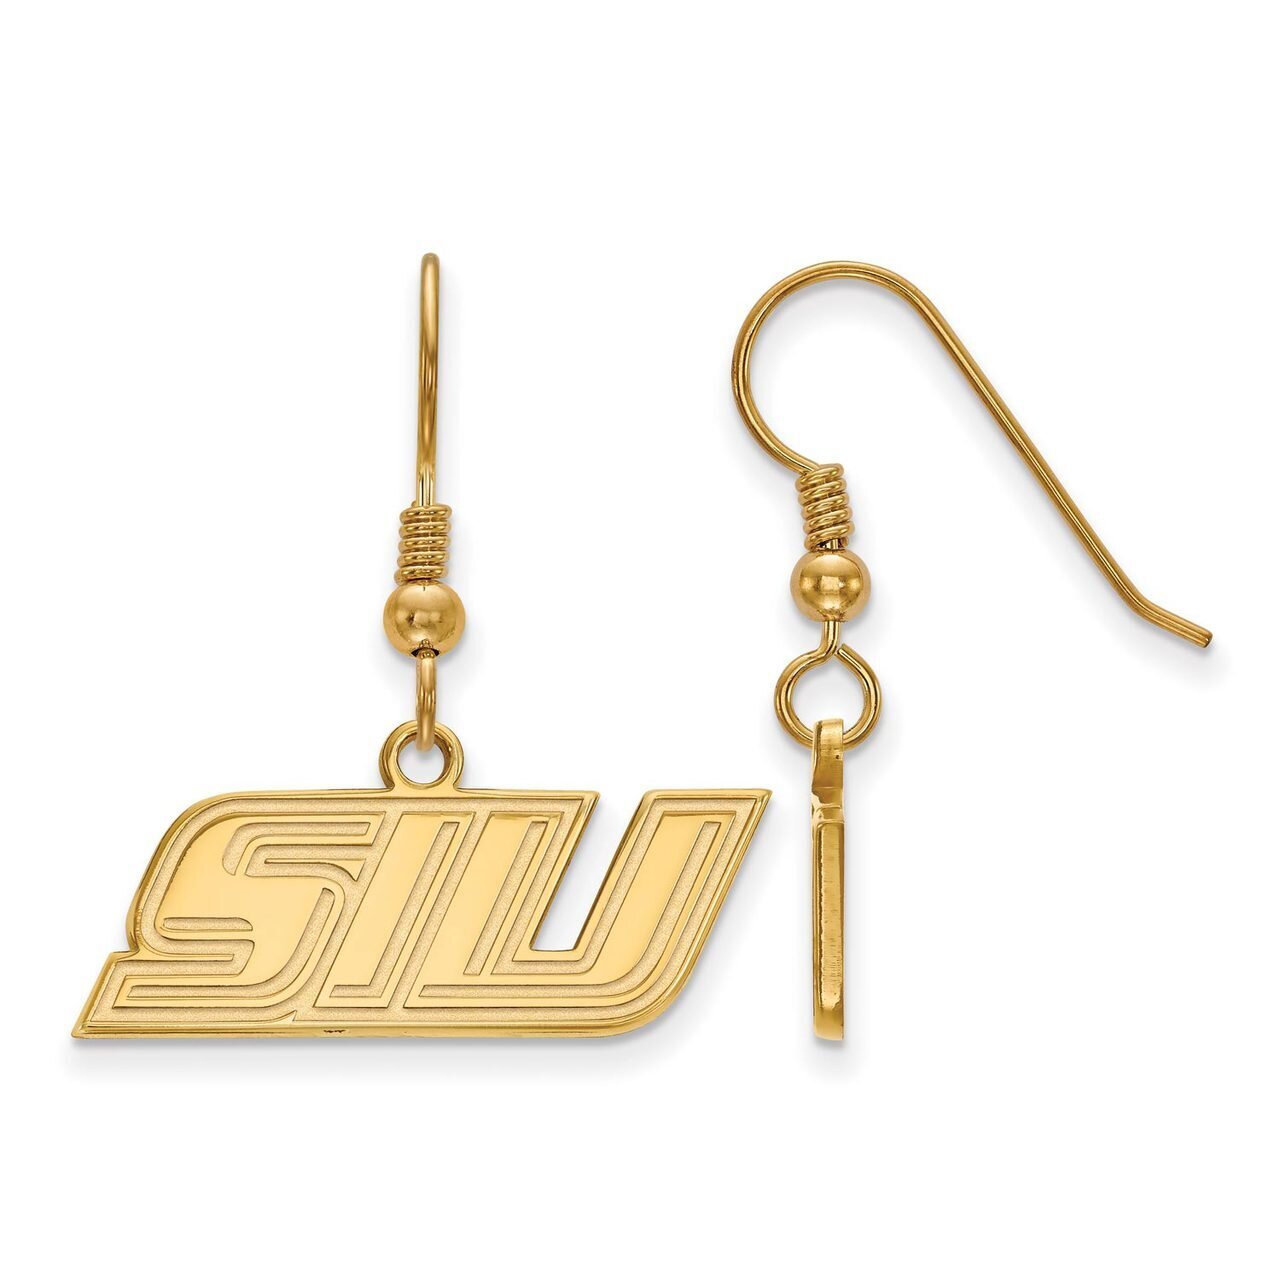 Southern Illinois University x-Small Dangle Earring Wire Gold-plated Silver GP005SIU